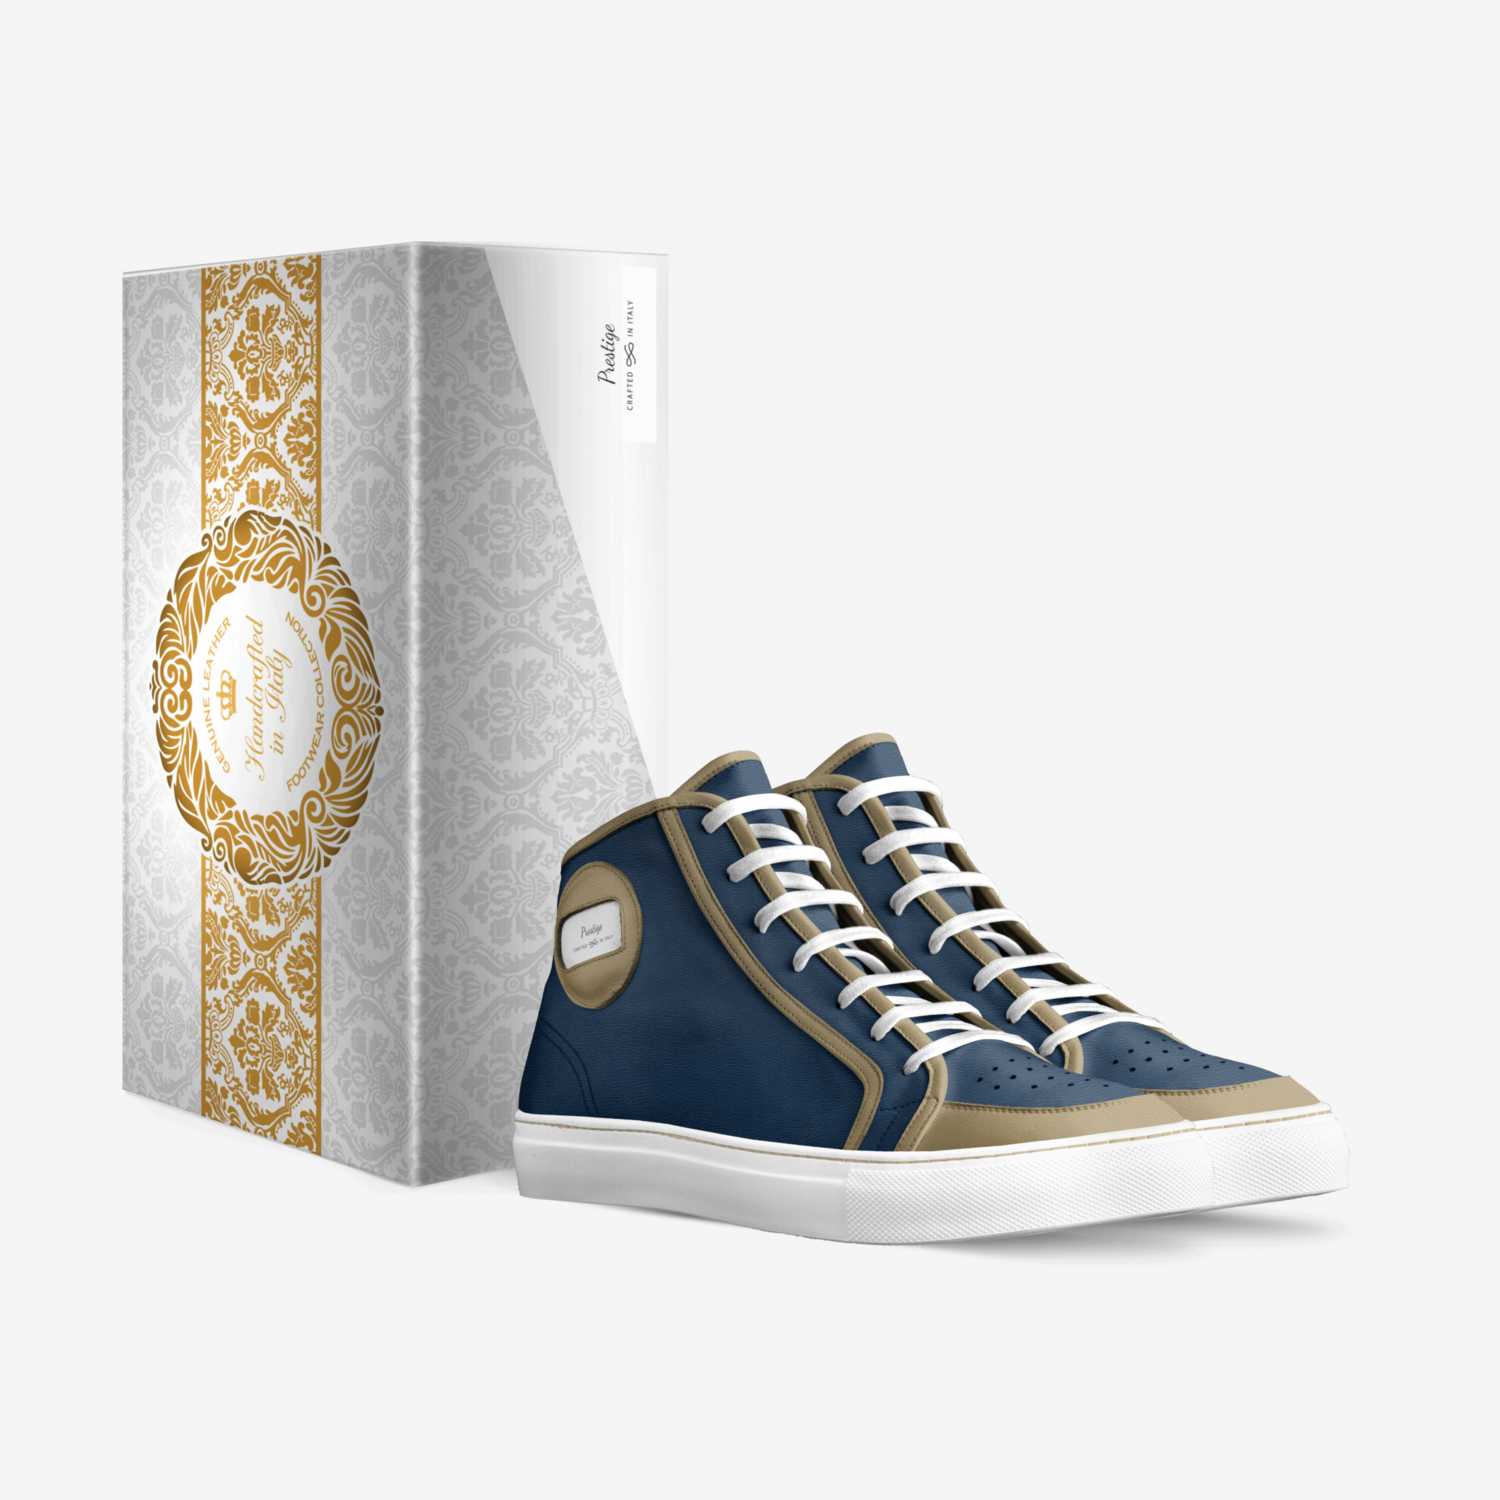 Divinity VIII custom made in Italy shoes by John Linzie | Box view